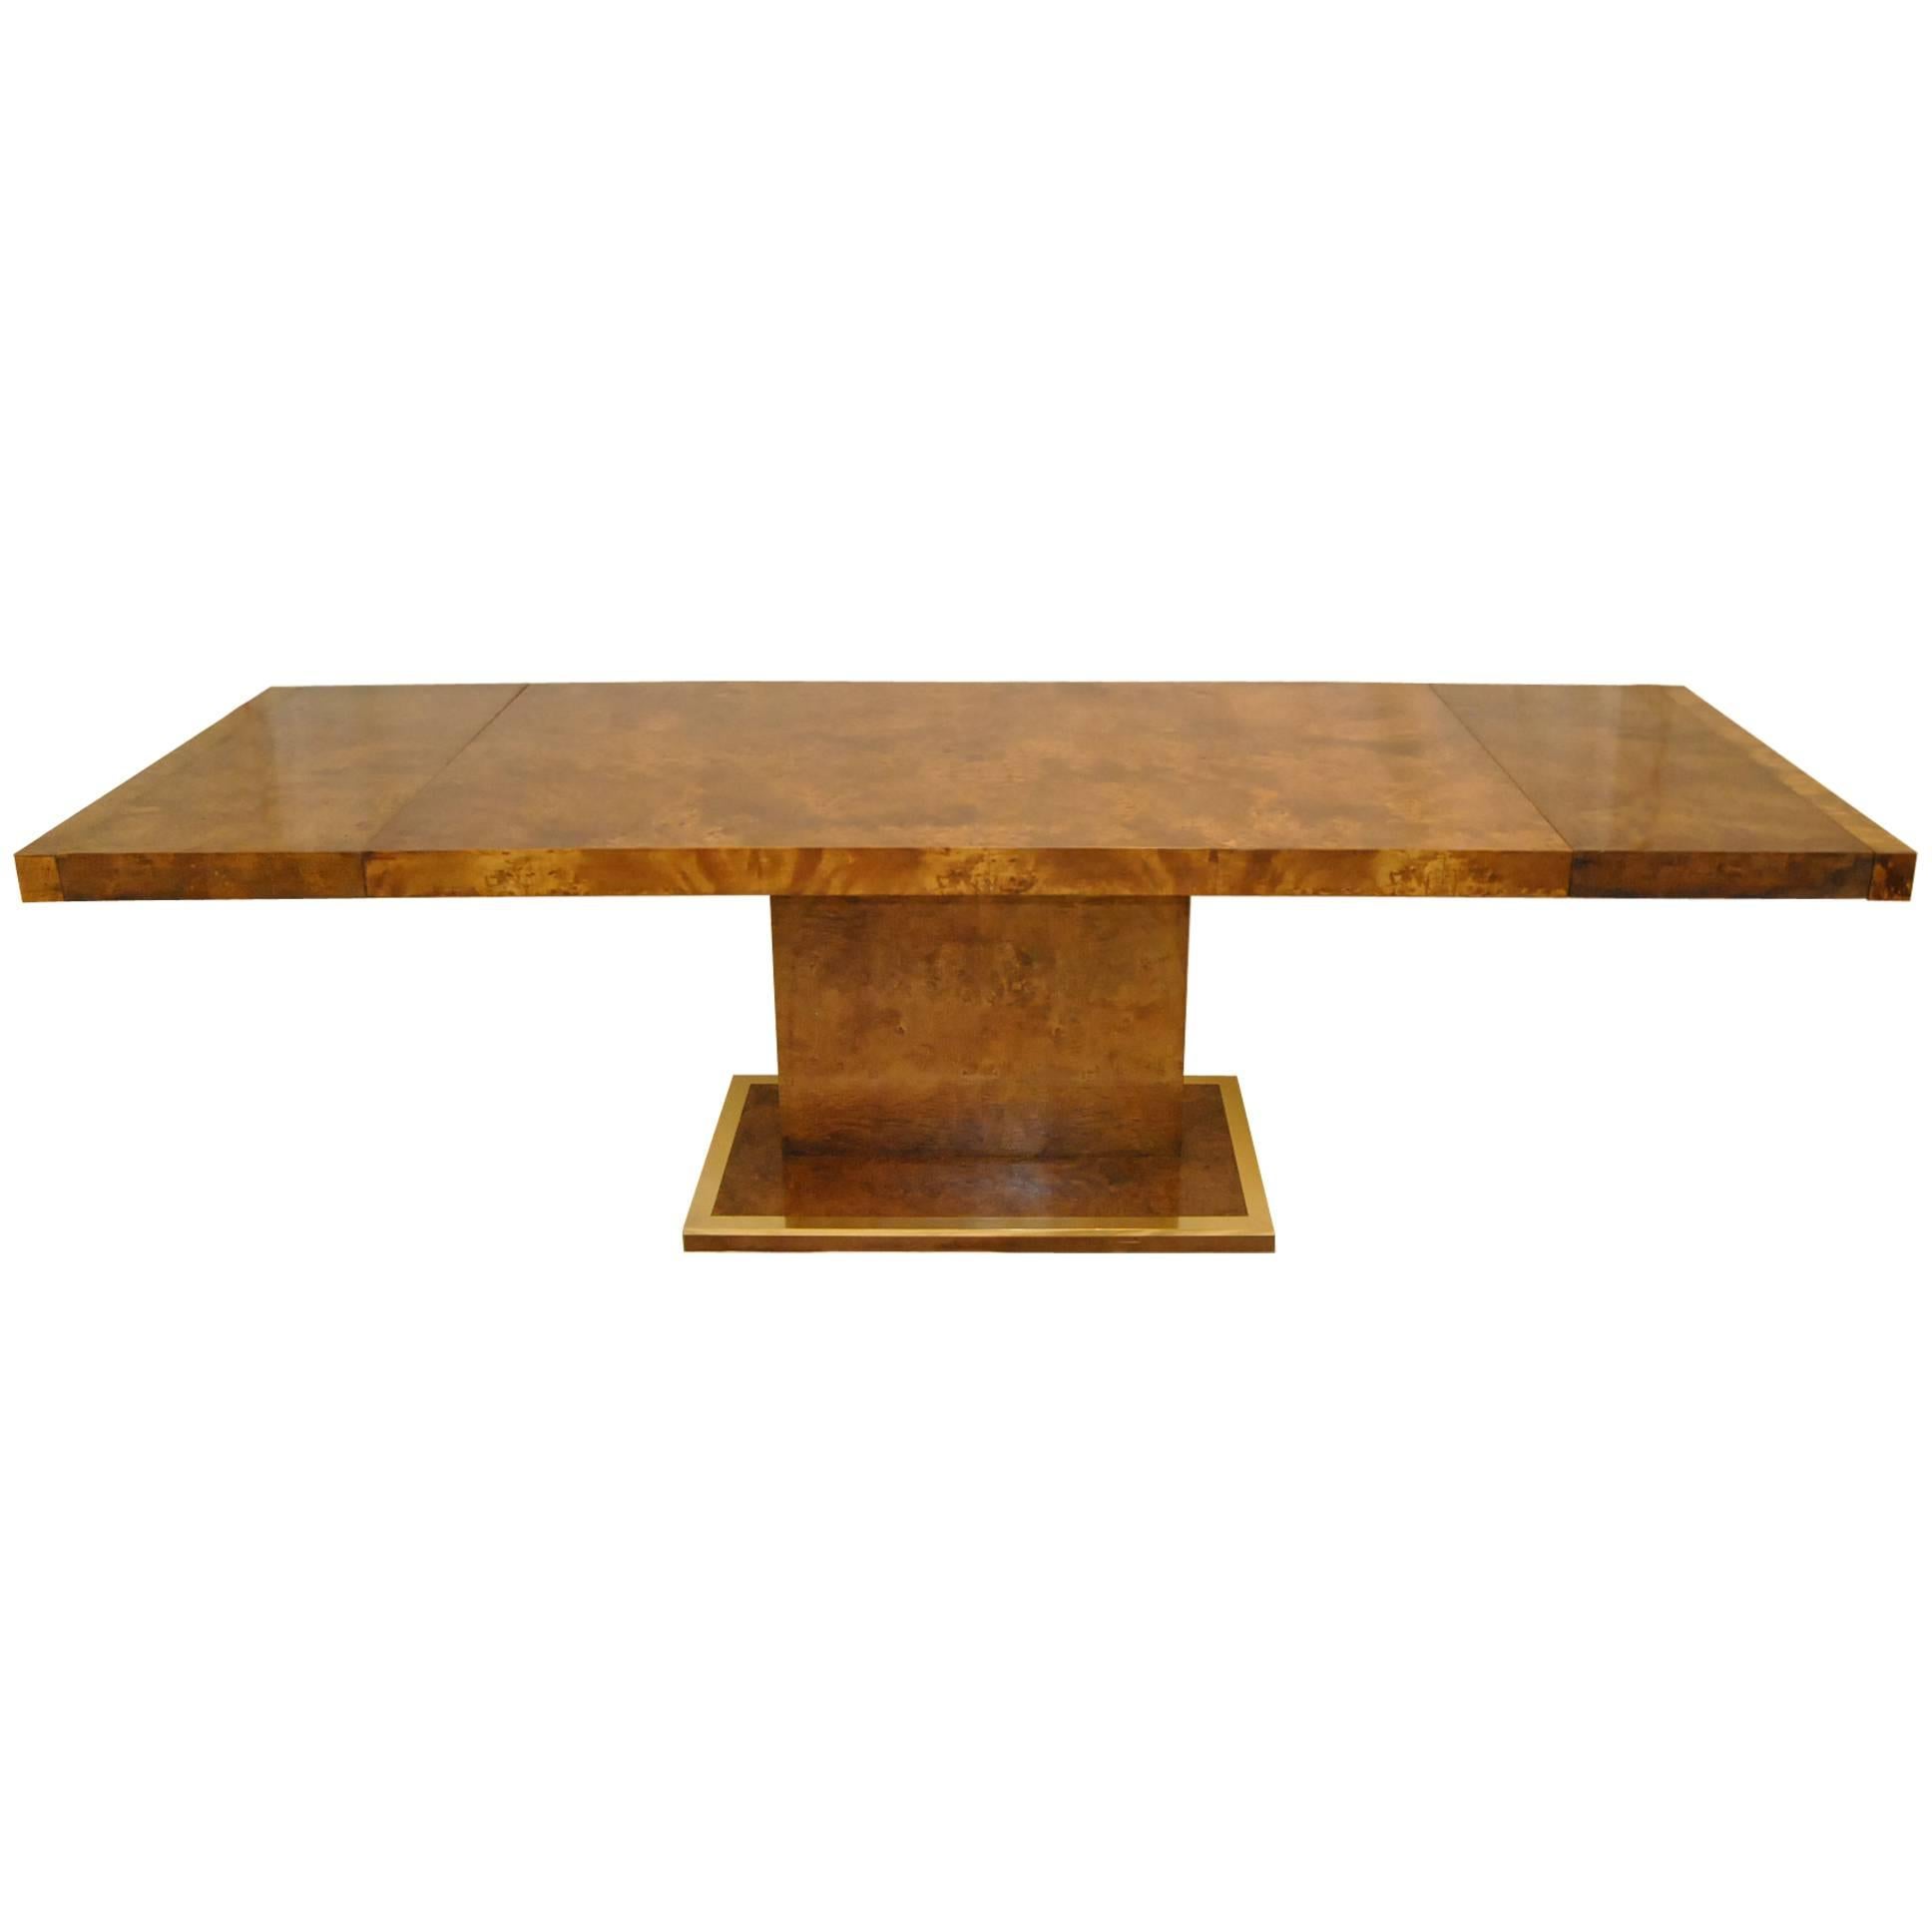 Thomasville Burled Elm Entry or Center Table, circa 1970s Brass Detail